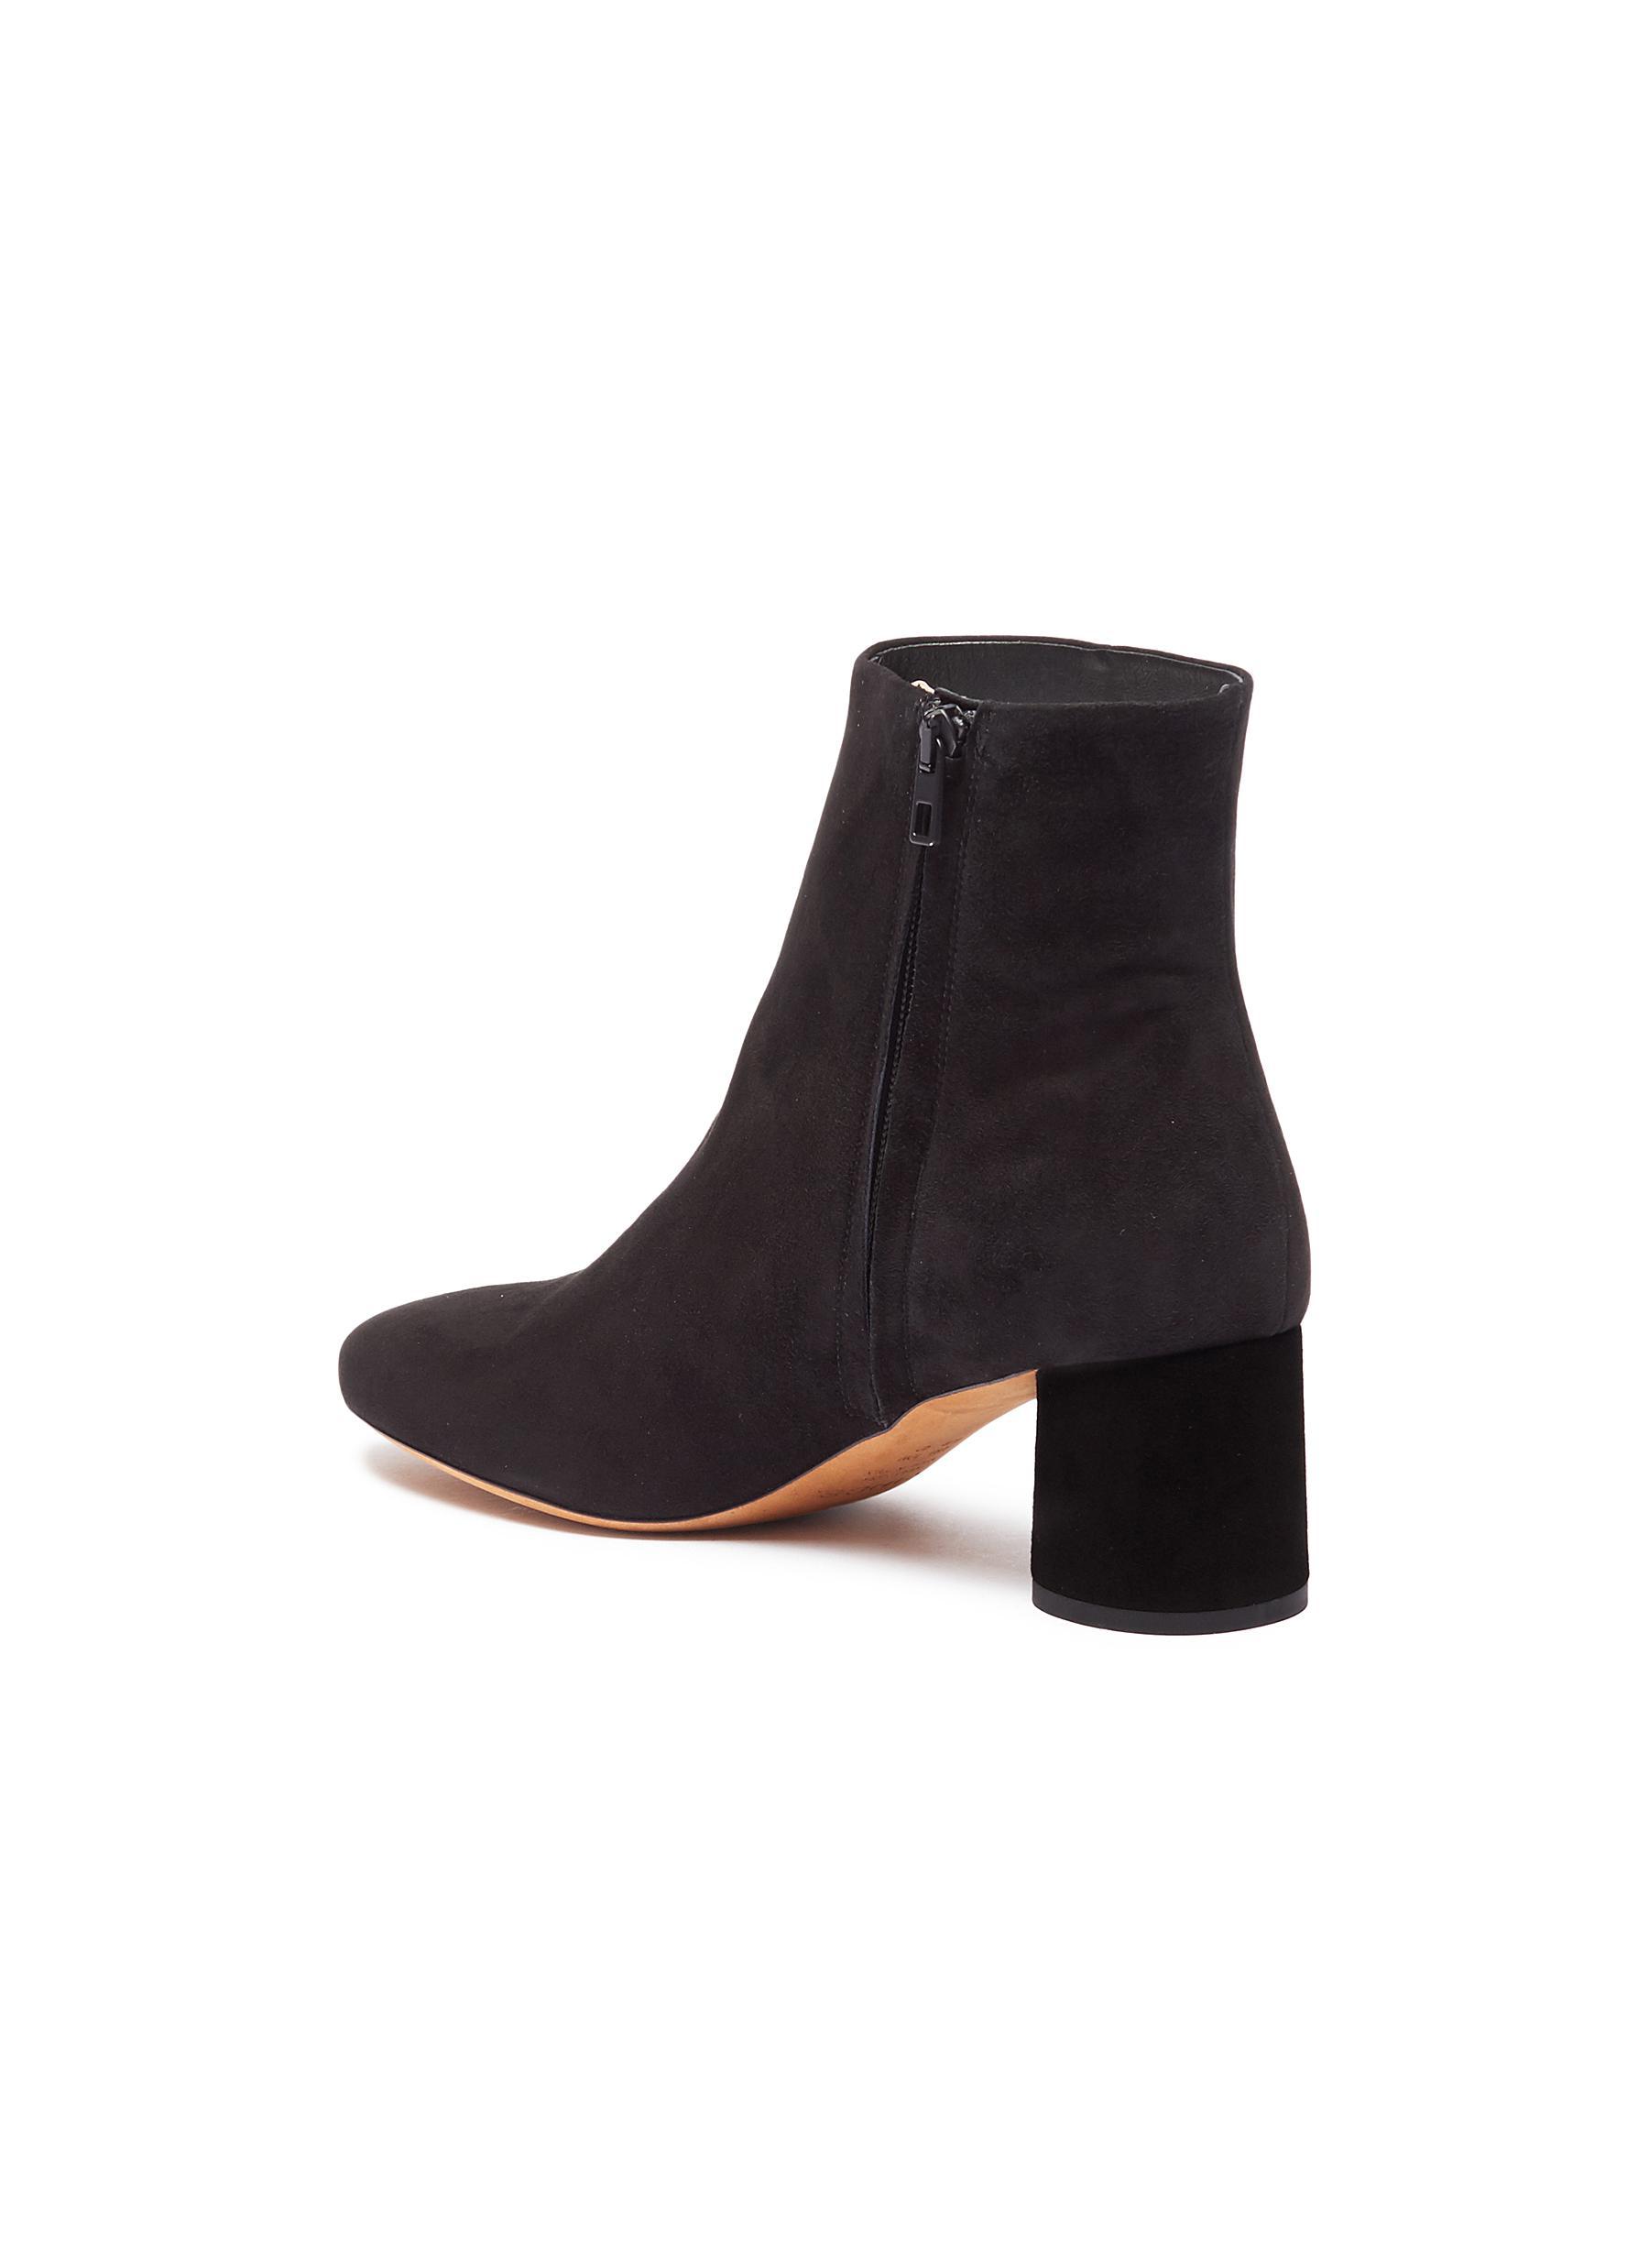 Vince 'tillie' Suede Ankle Boots in 